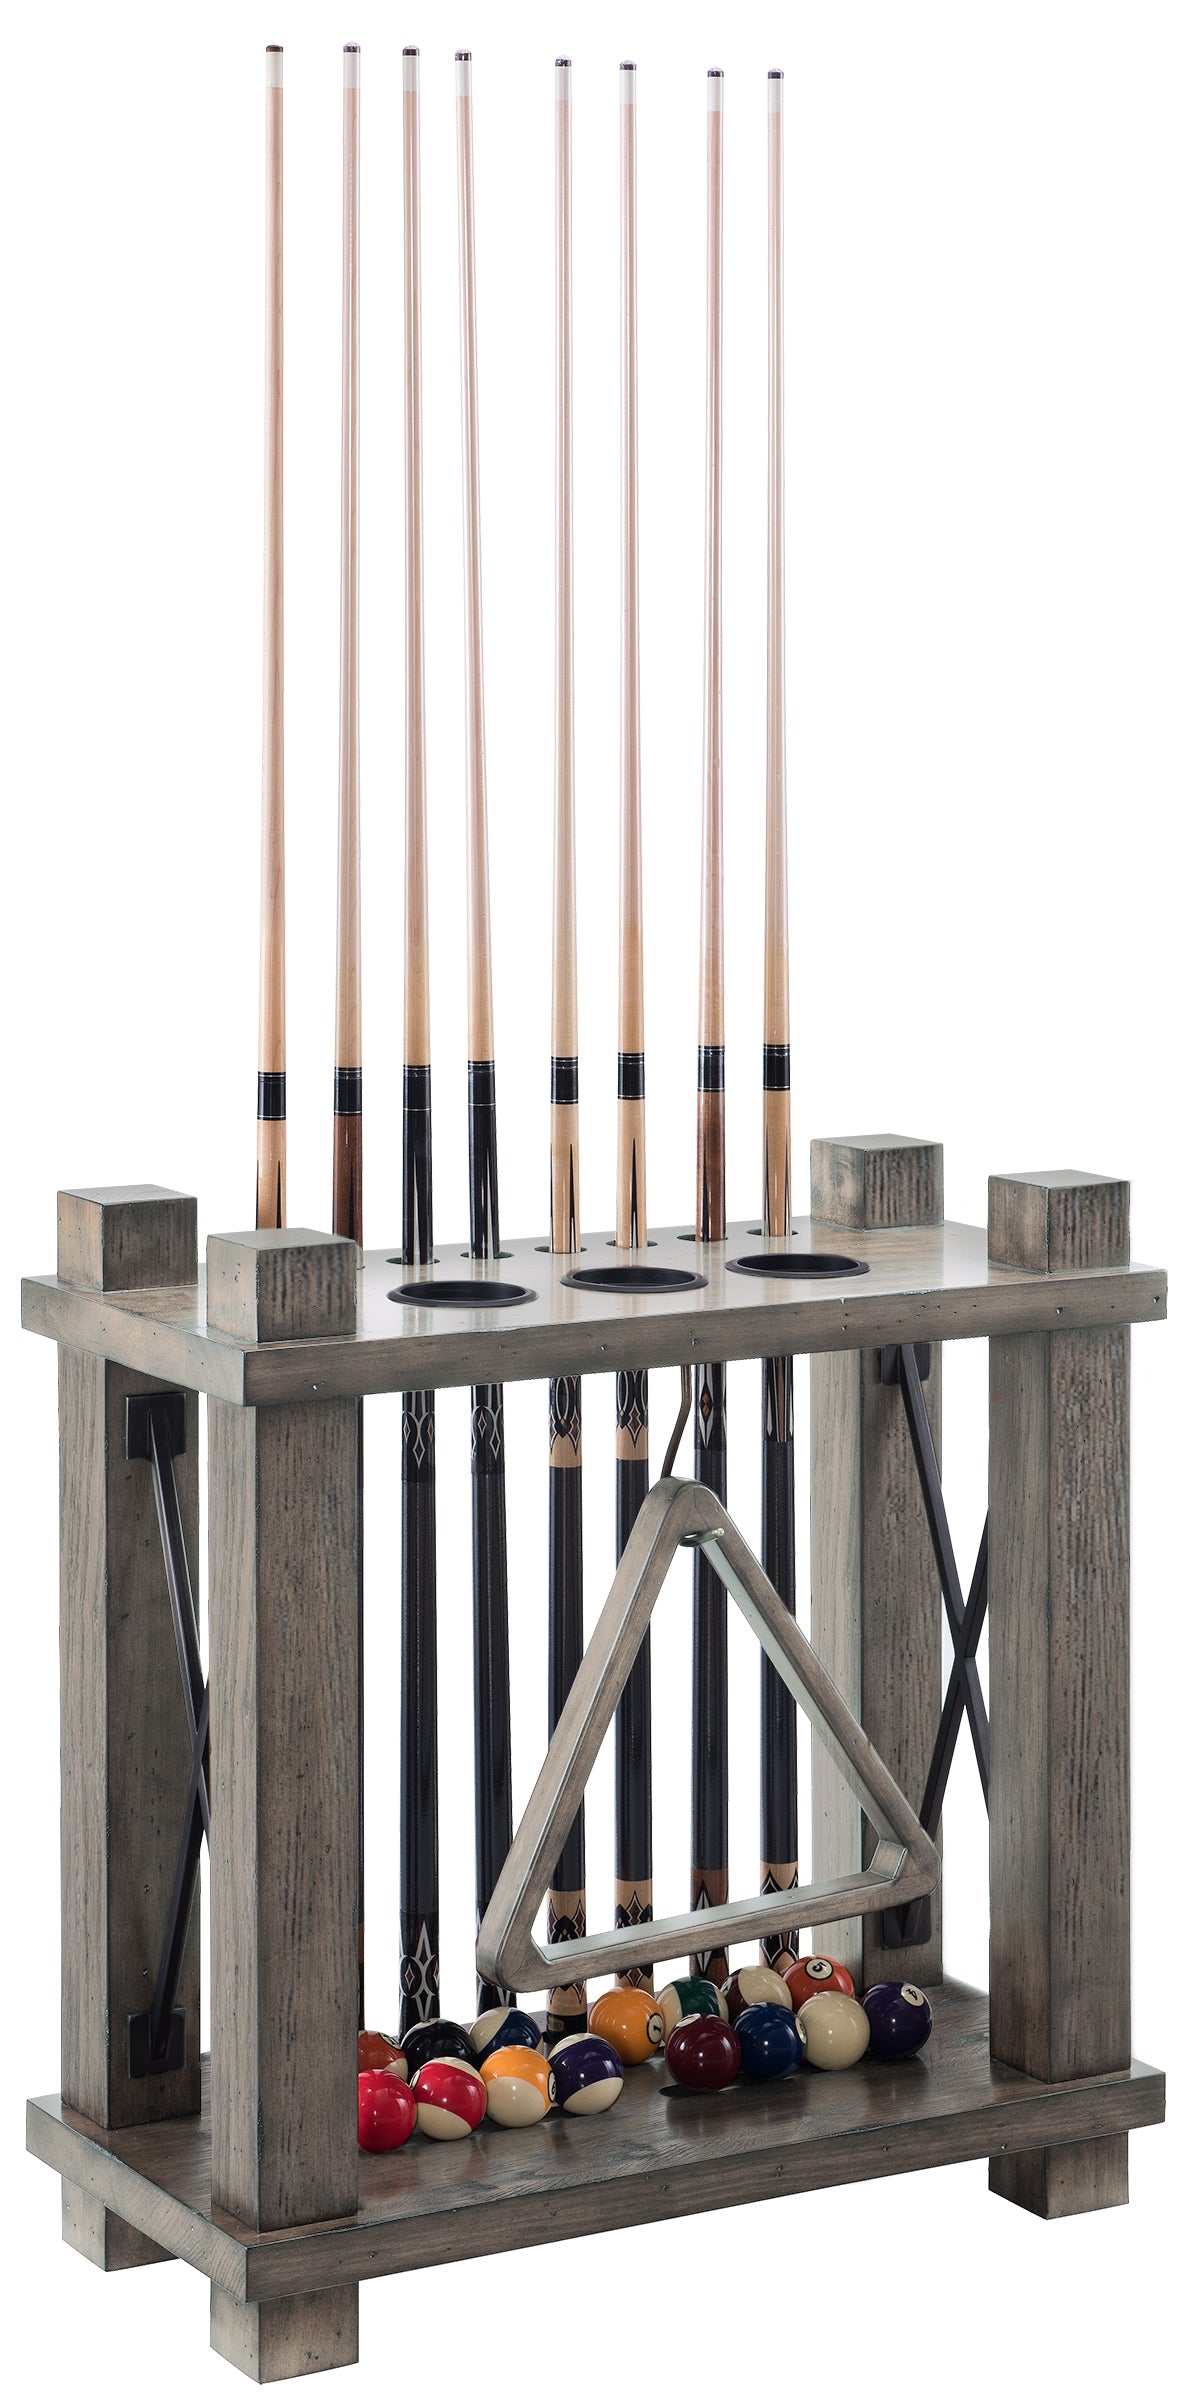 Legacy Billiards Harpeth Floor Cue Rack with Pool Cues and Balls